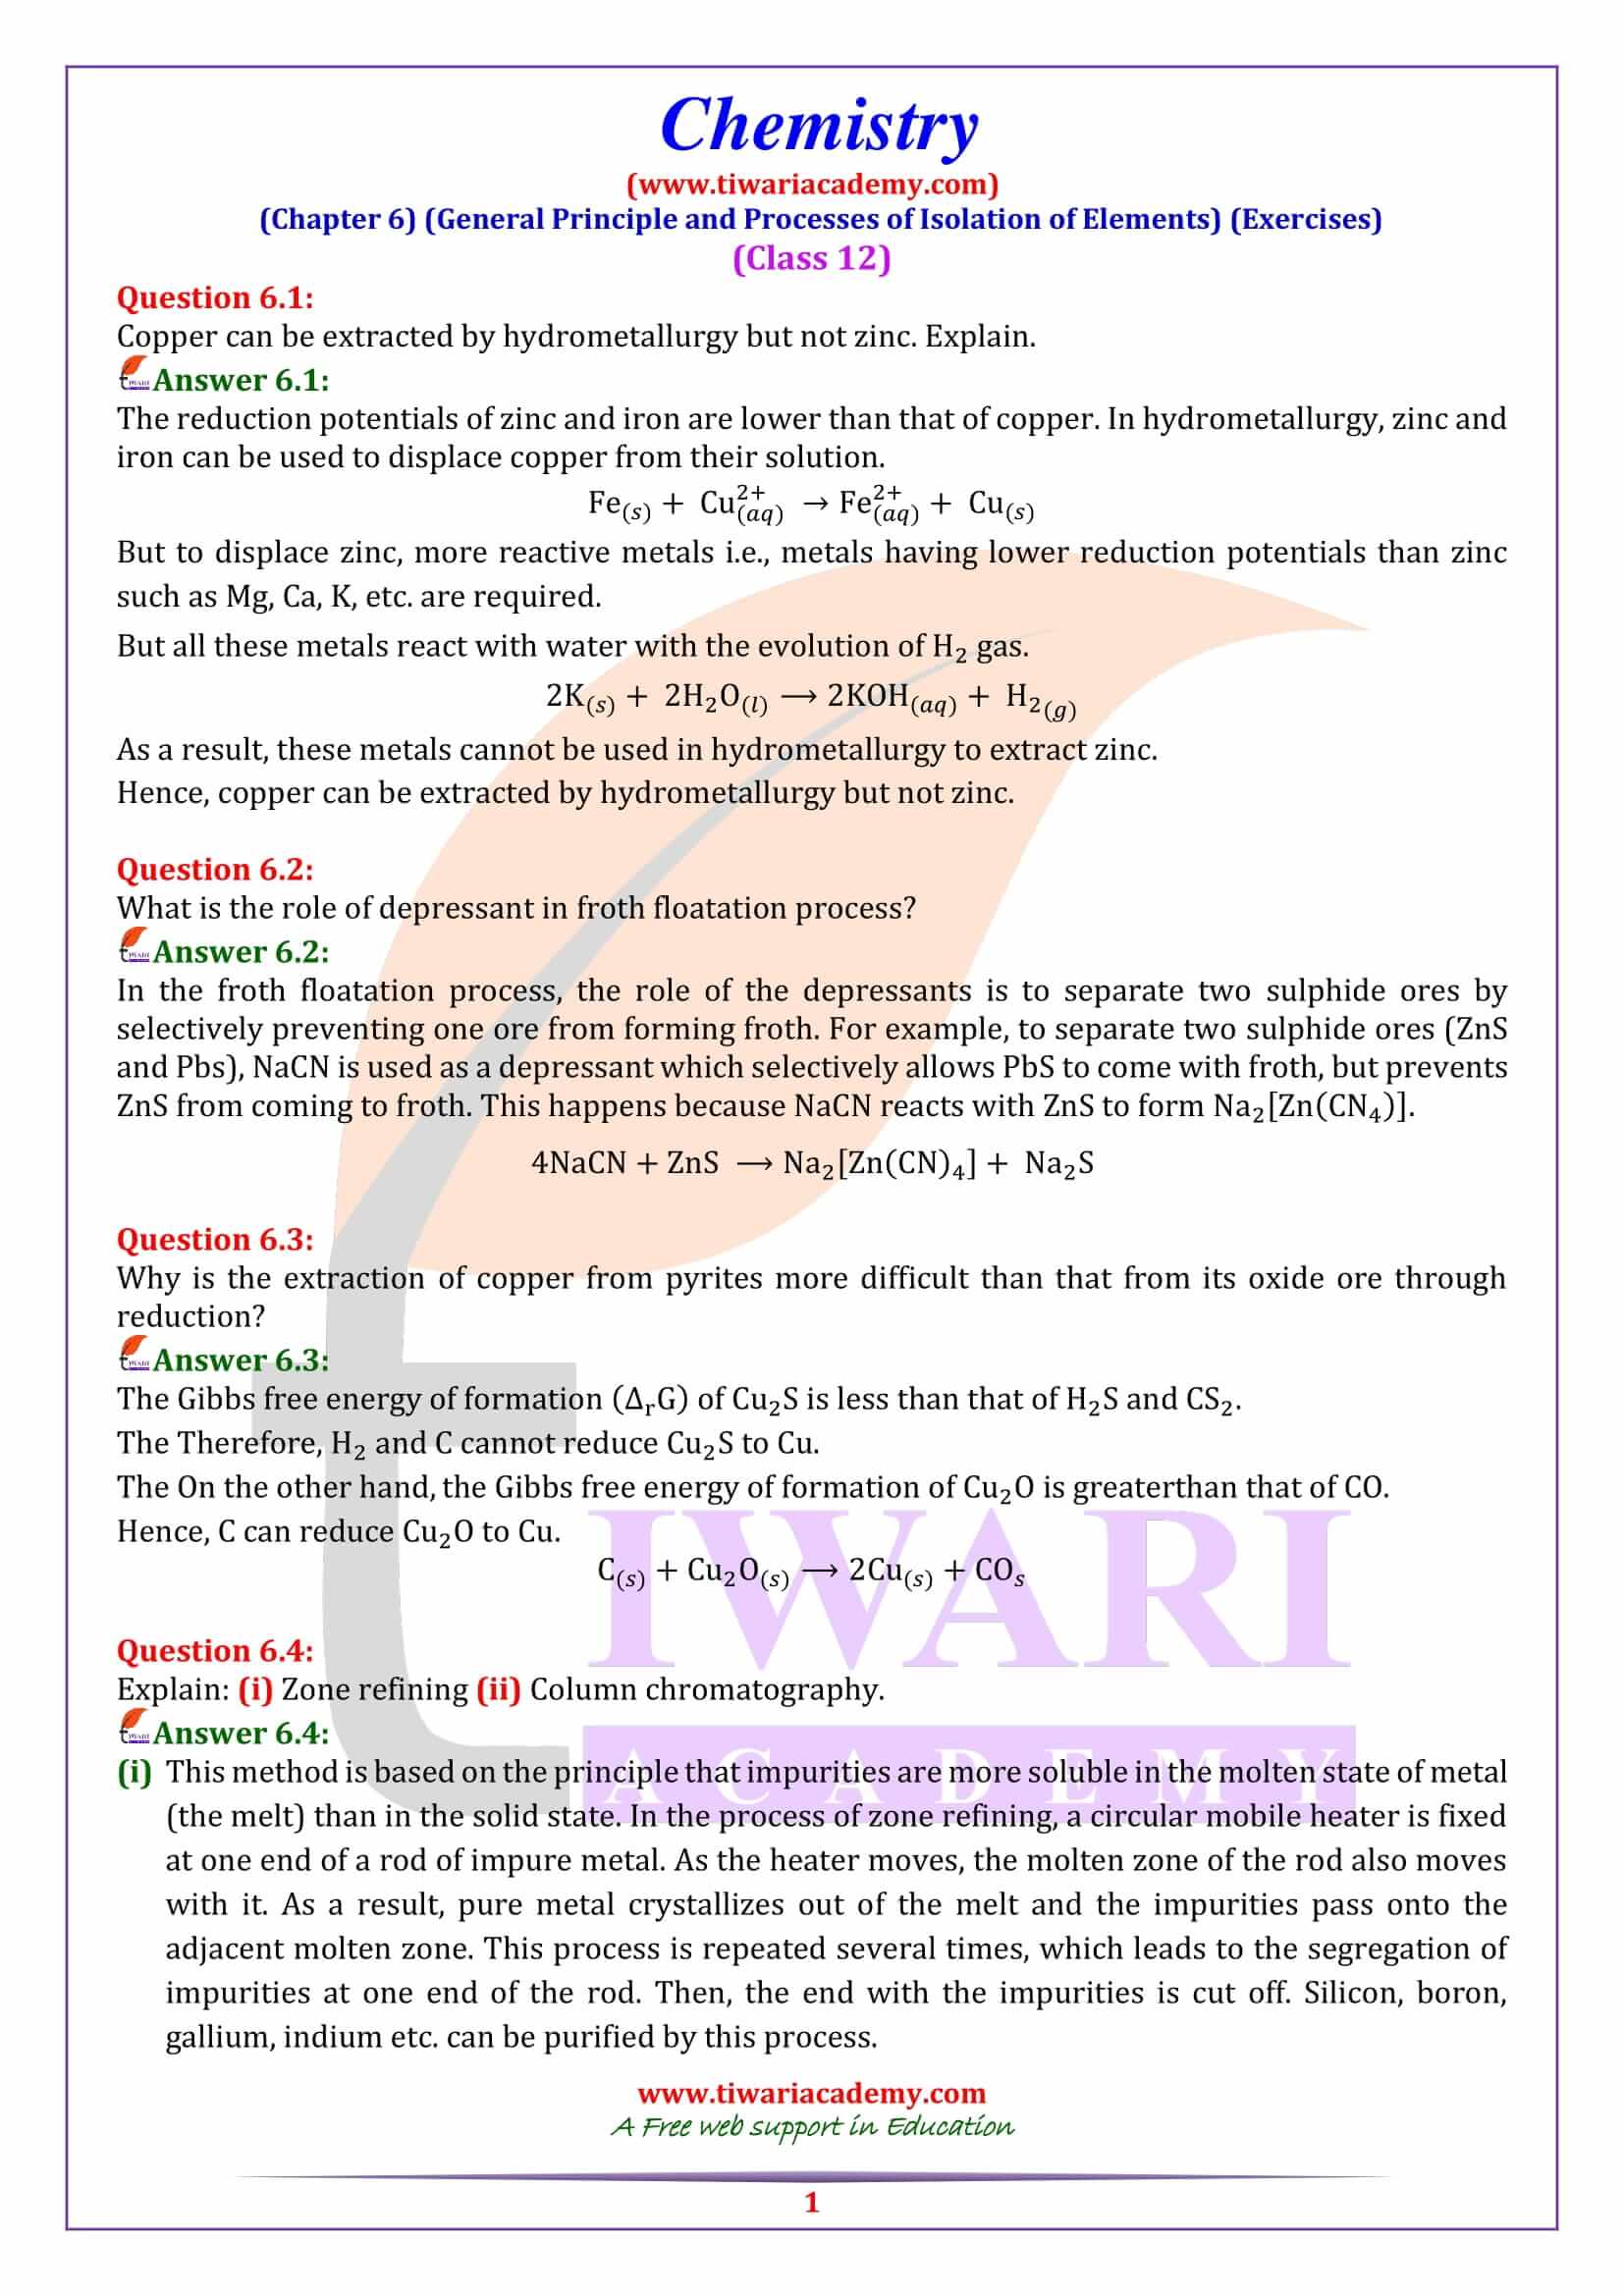 NCERT Solutions for Class 12 Chemistry Chapter 6 General Principles